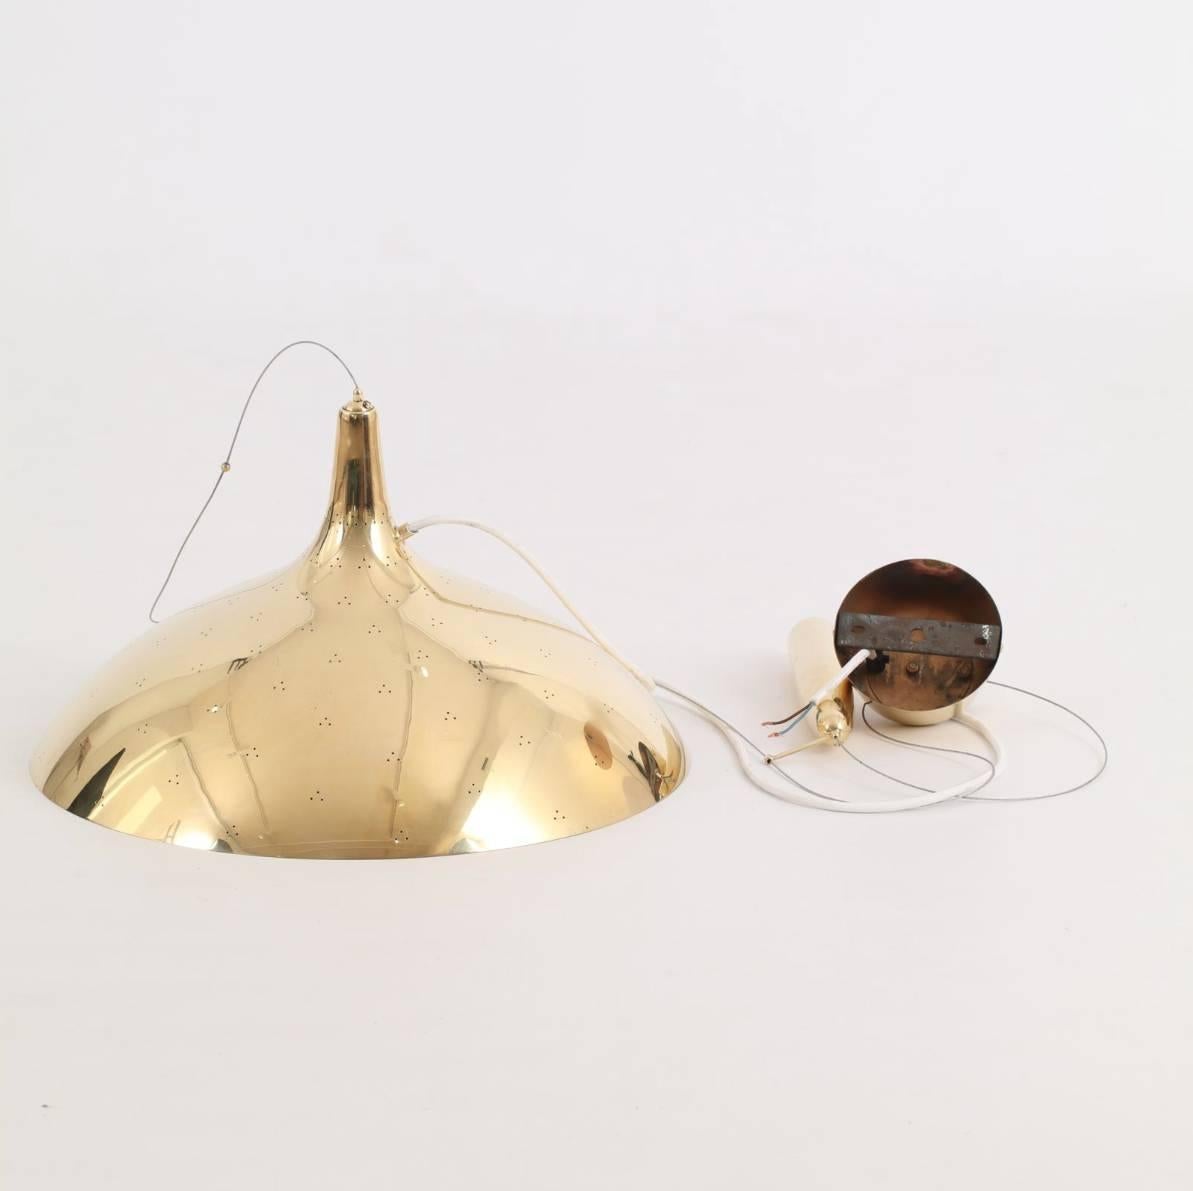 20th Century Paavo Tynell Brass Counter Weight Pendant Lamp A1965, Taito Oy, Finland, 1950s